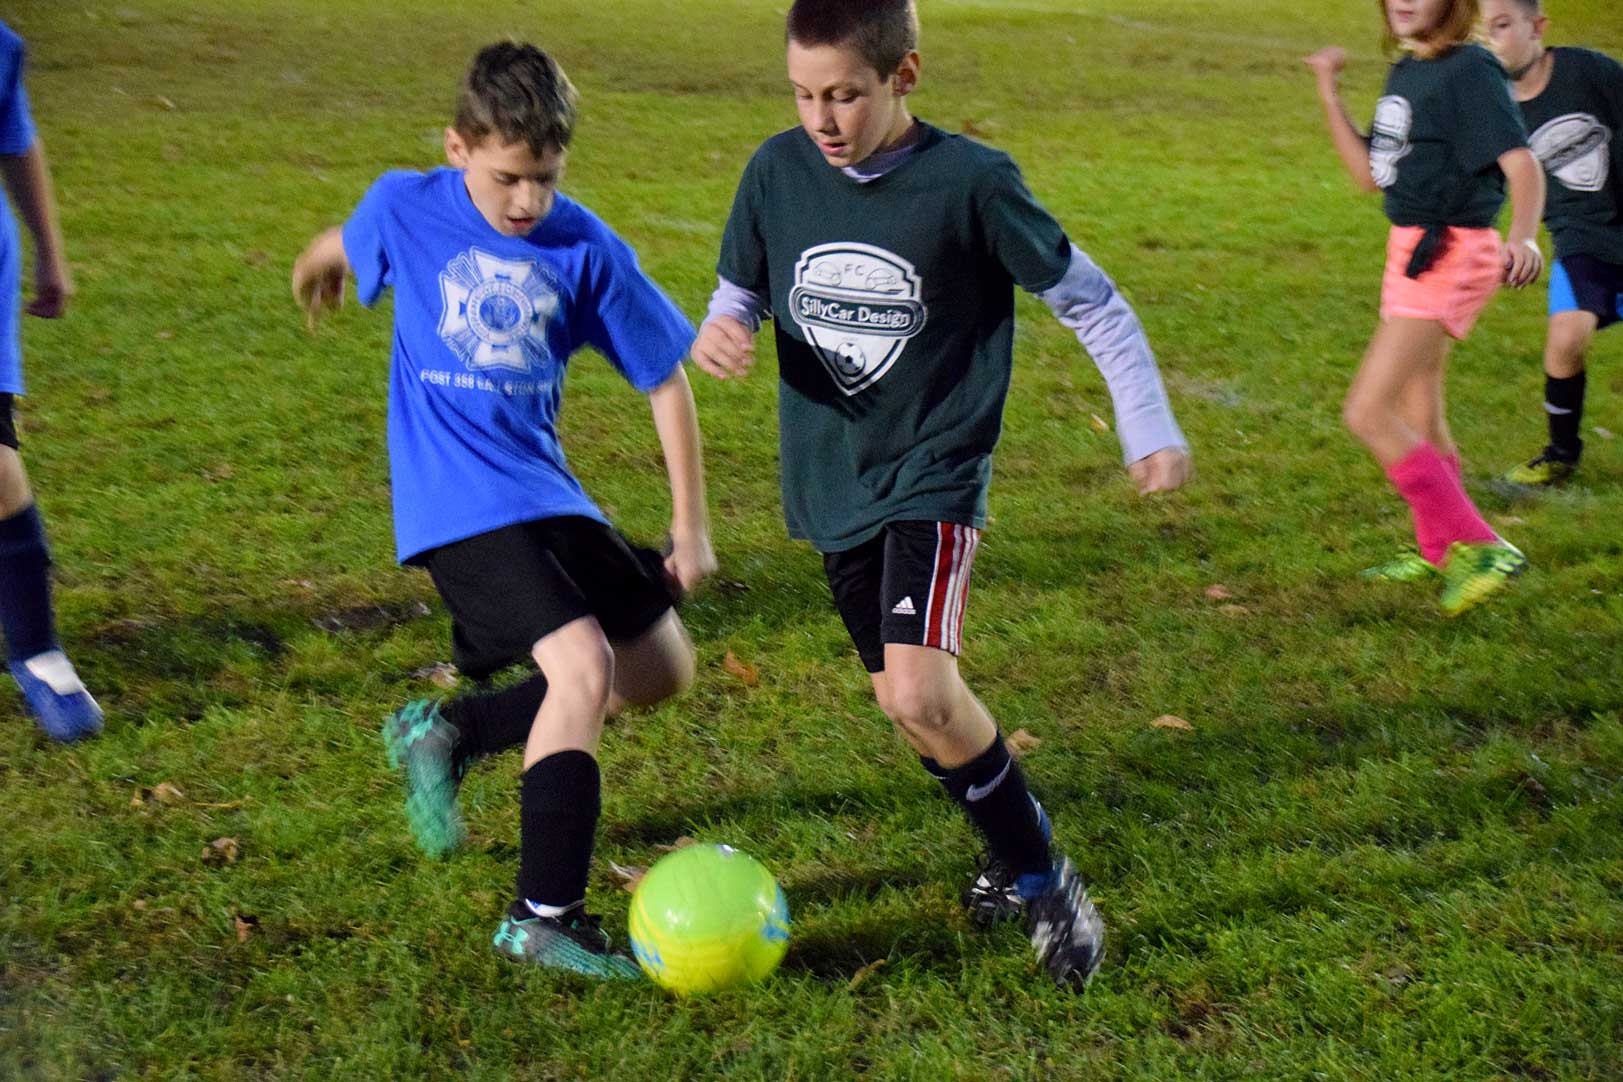 Photo of kids playing soccer on team SillyCar Design at the Rec Field in Ballston Spa.